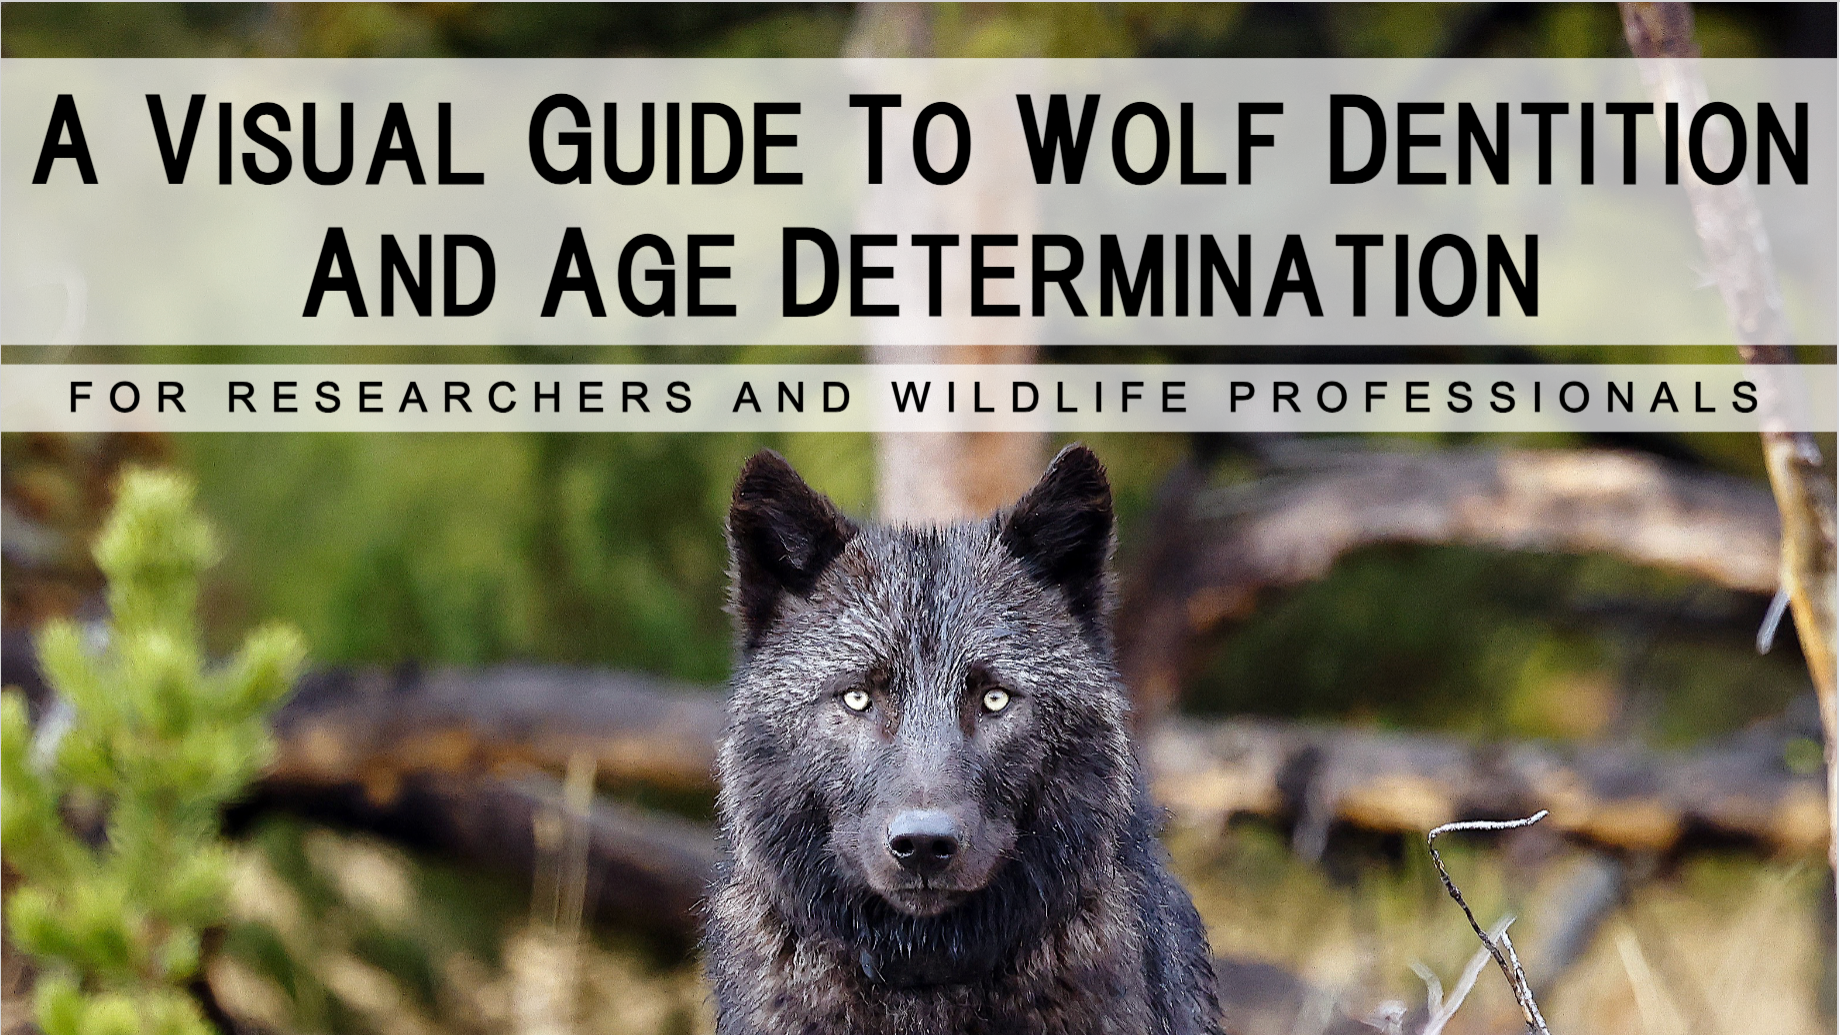 Visual Guide to Wolf Dentition and Age Determination.